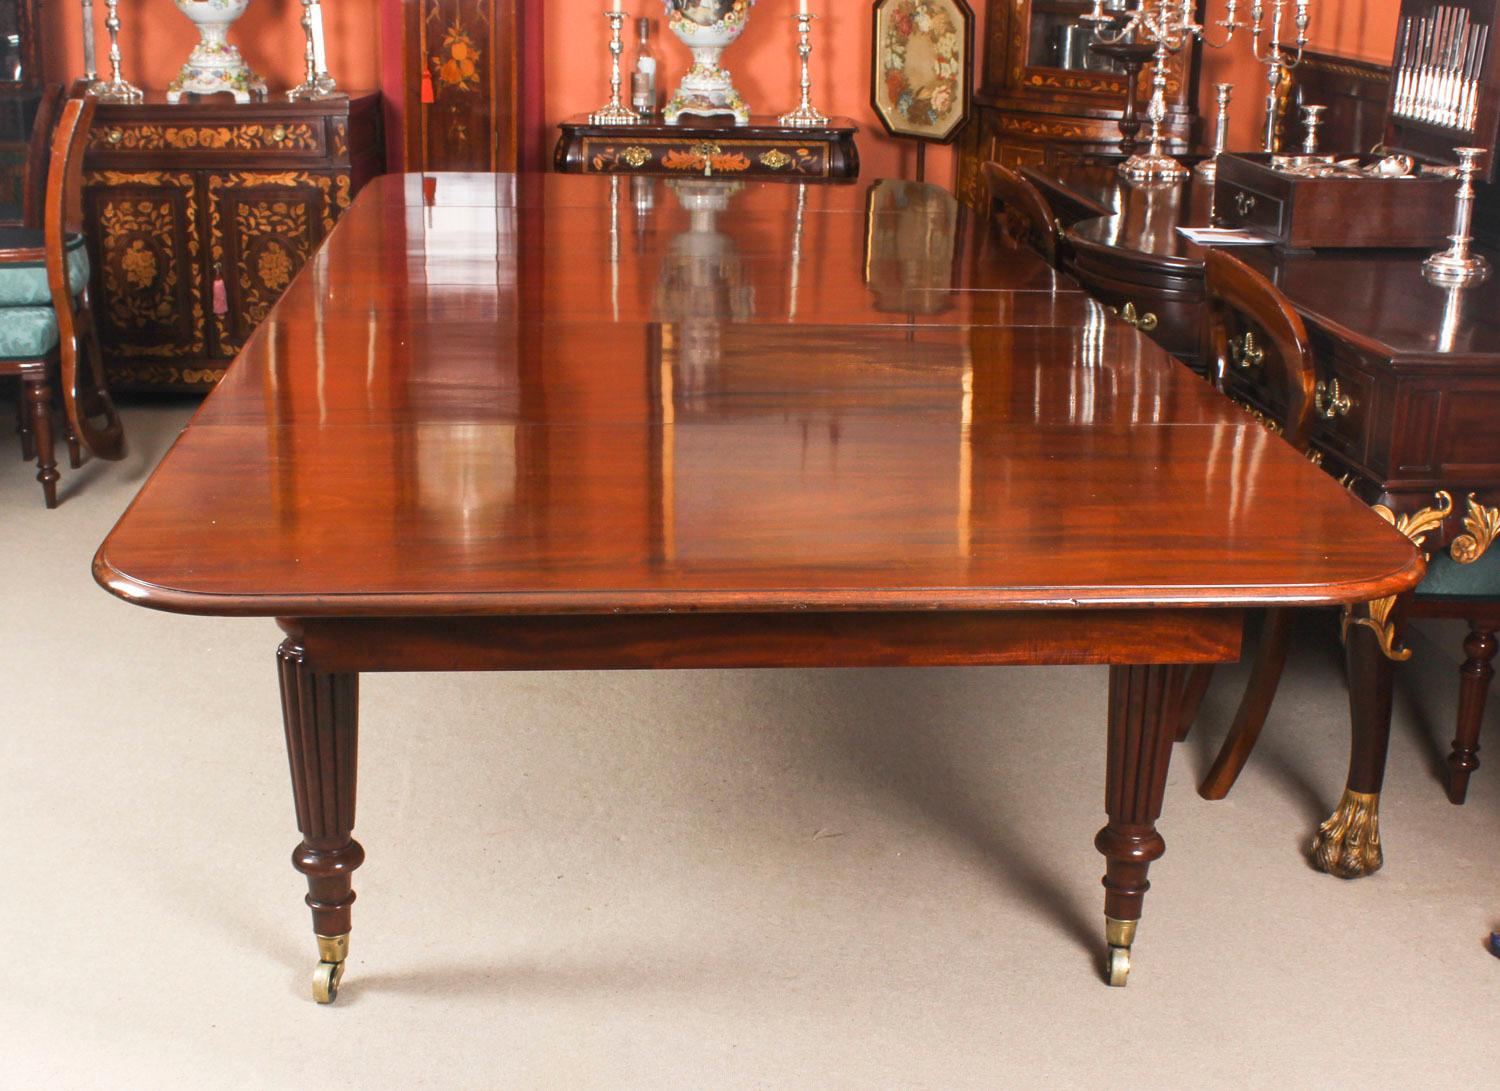 This is a superb antique early Victorian flame mahogany extending dining table, circa 1840 in date.

This amazing table can sit ten people in comfort and at a stretch up to fourteen. It has been hand-crafted from solid flame mahogany which has a